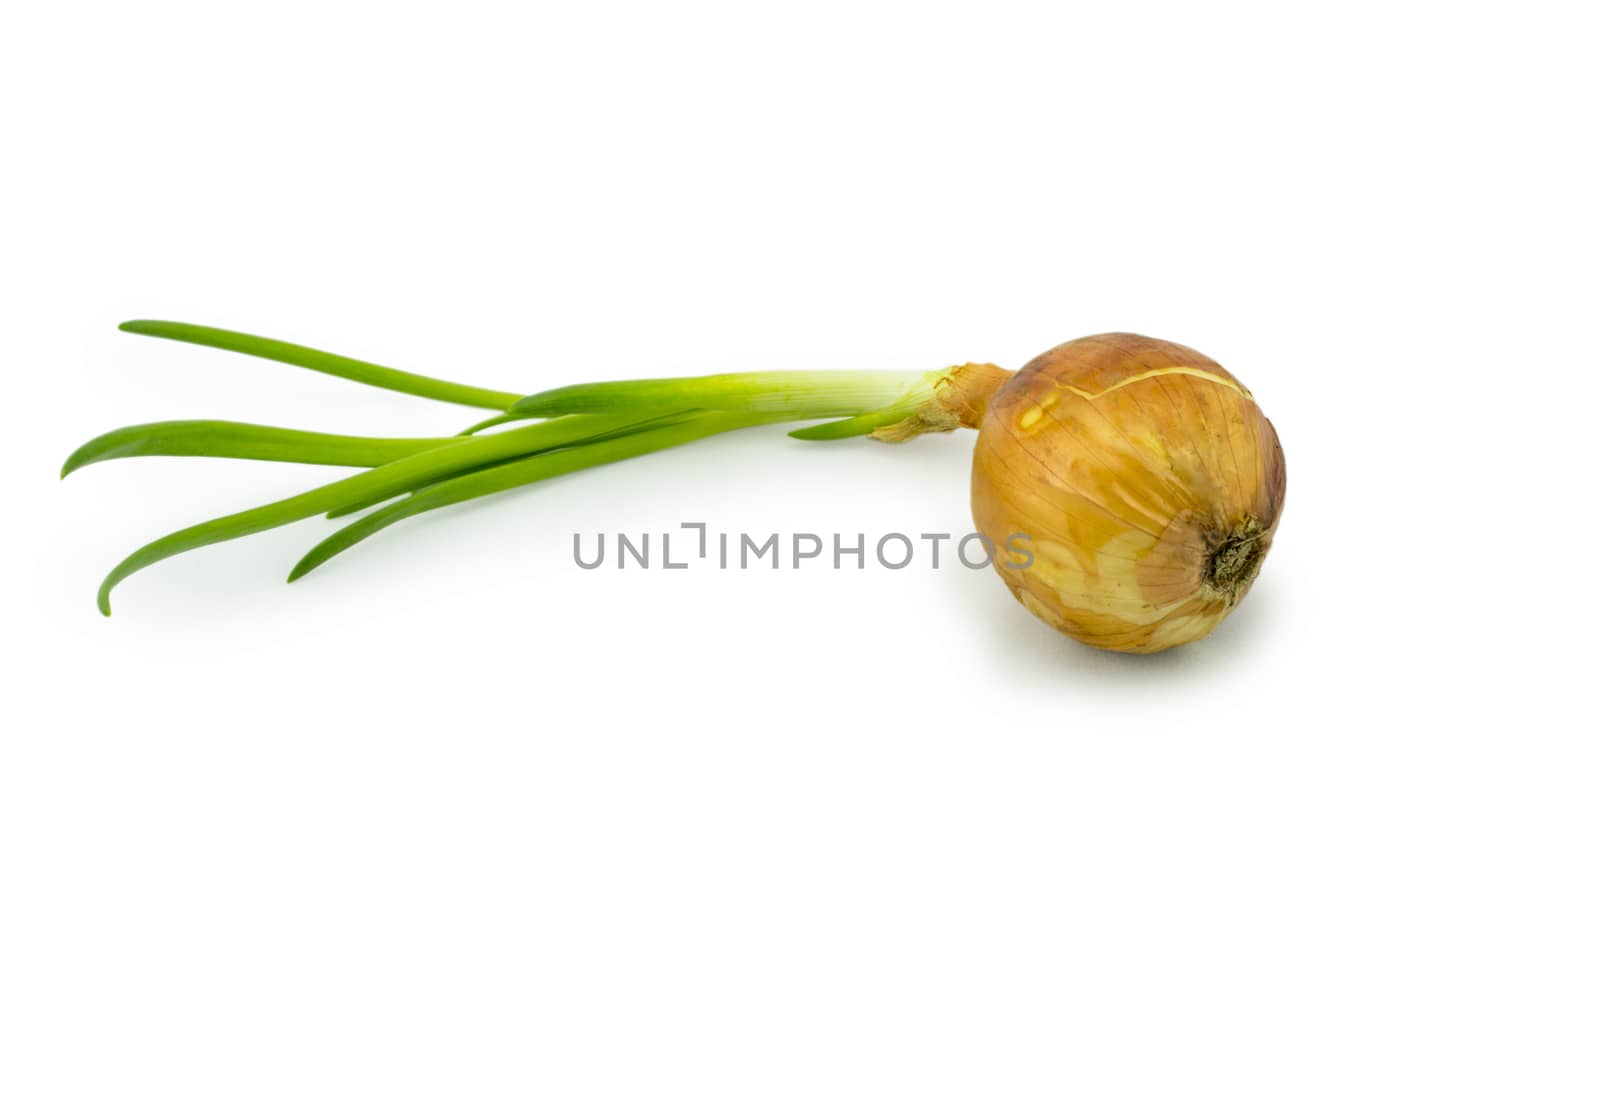 Sprouting onions isolated on white background. For your commercial and editorial use.